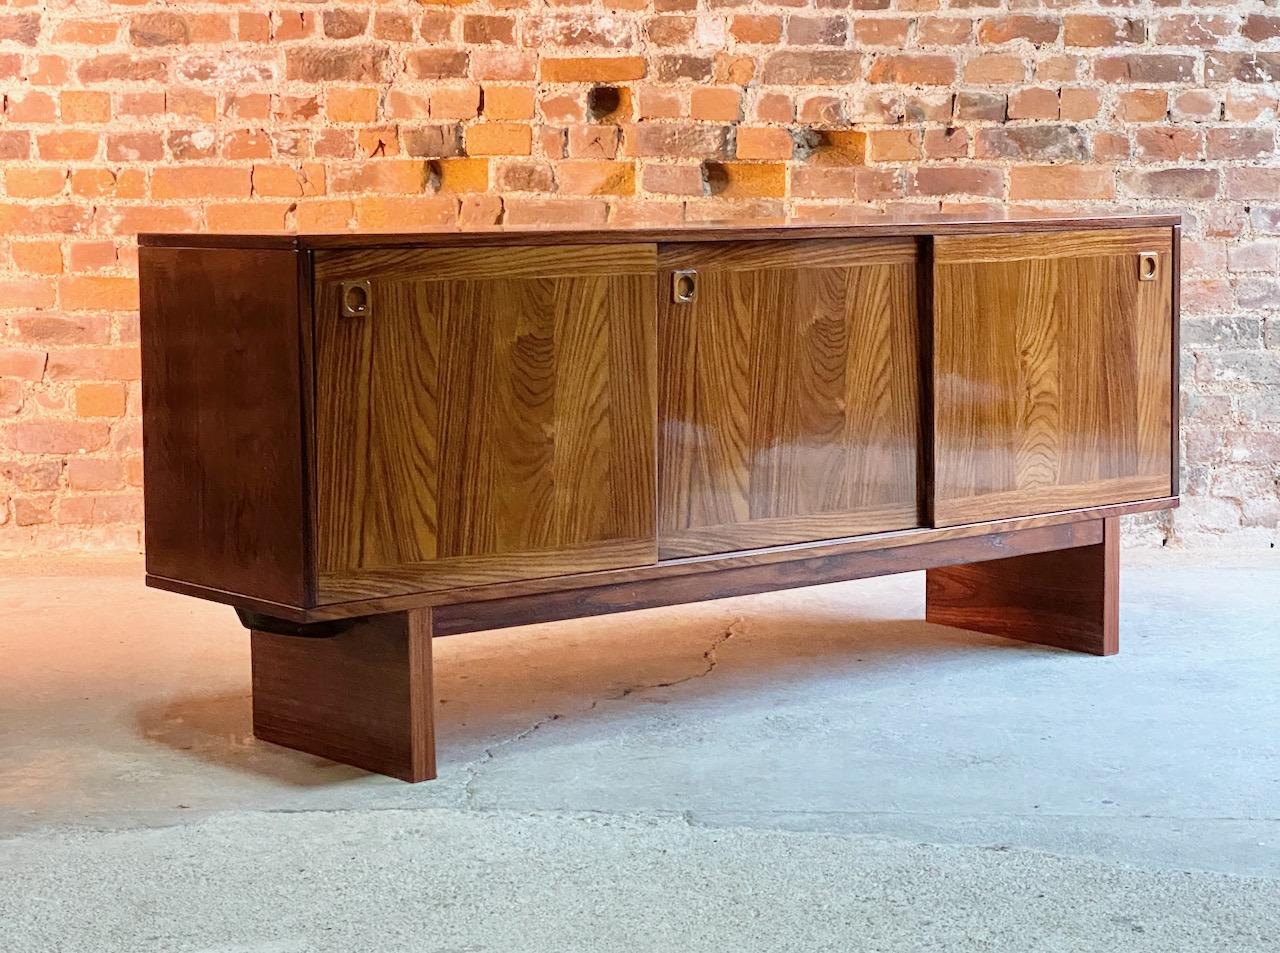 Midcentury Danish rosewood sideboard, Denmark, 1970s

Elegant Mid-Century Modern Danish design Brazilian rosewood sideboard Denmark circa 1970, the rectangular figured top over three sliding doors to the left cupboard two drawers, the middle and